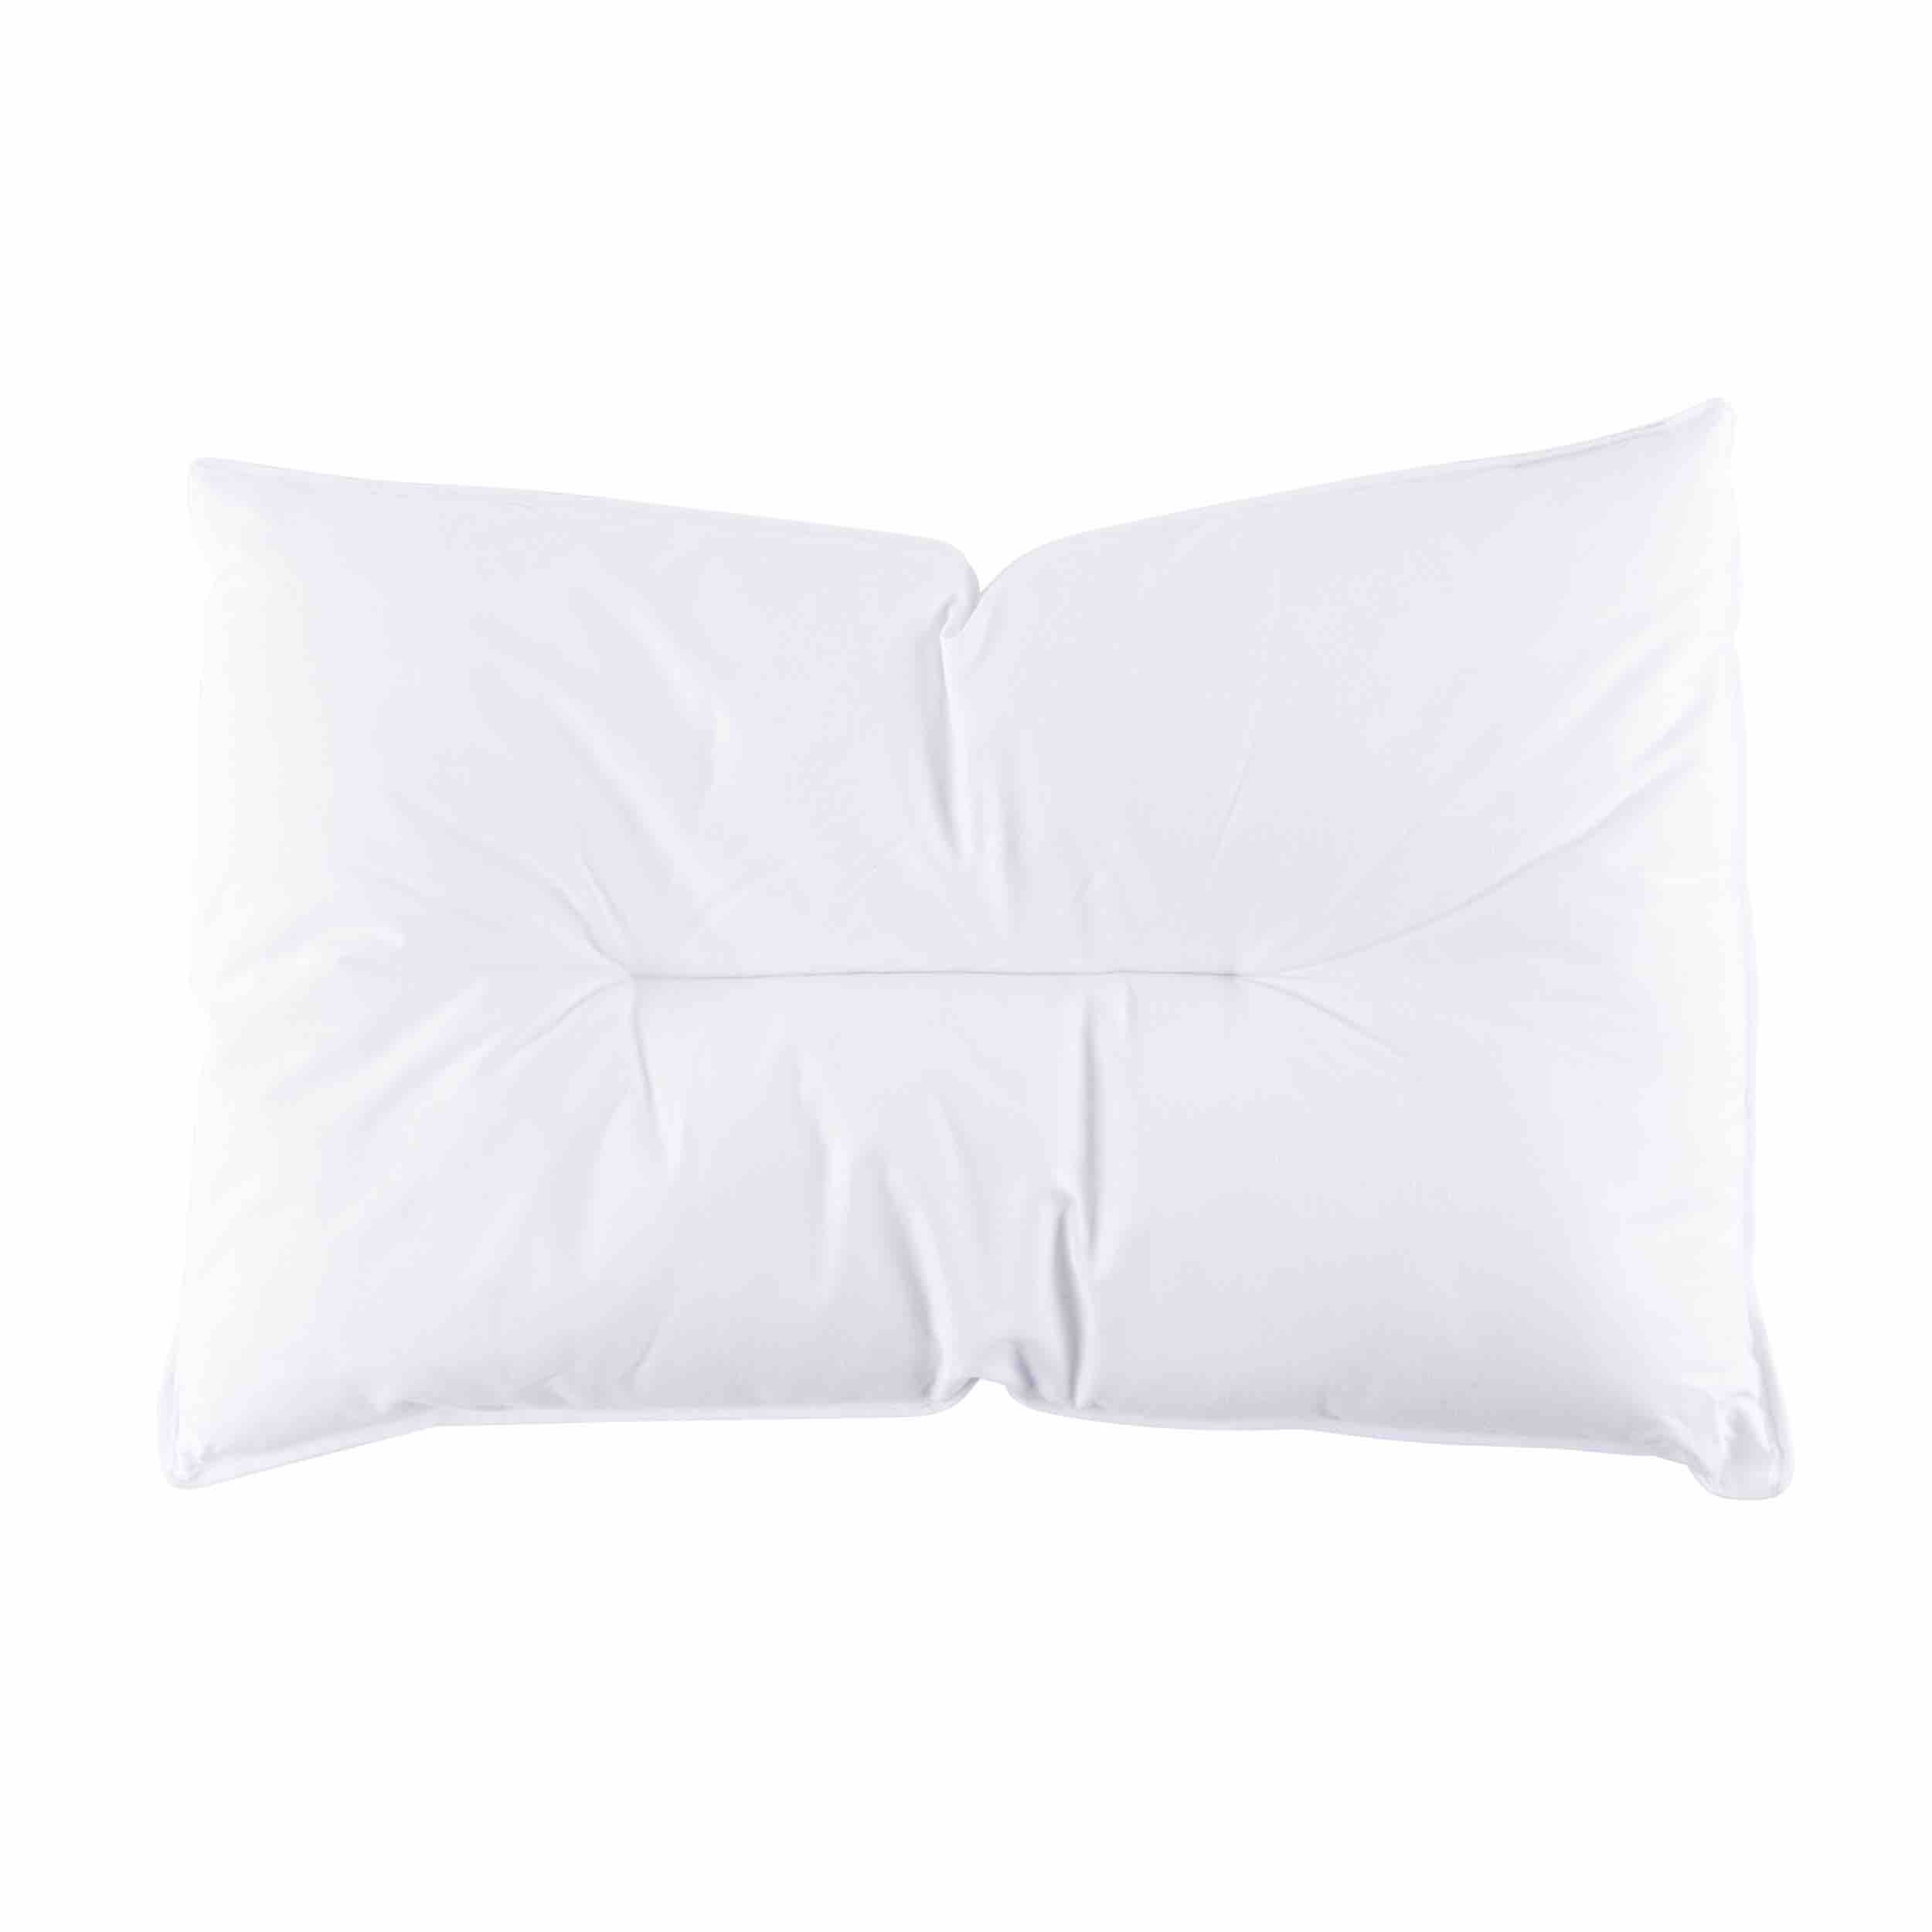 Theophile & Patachou Cot Bed Pillow